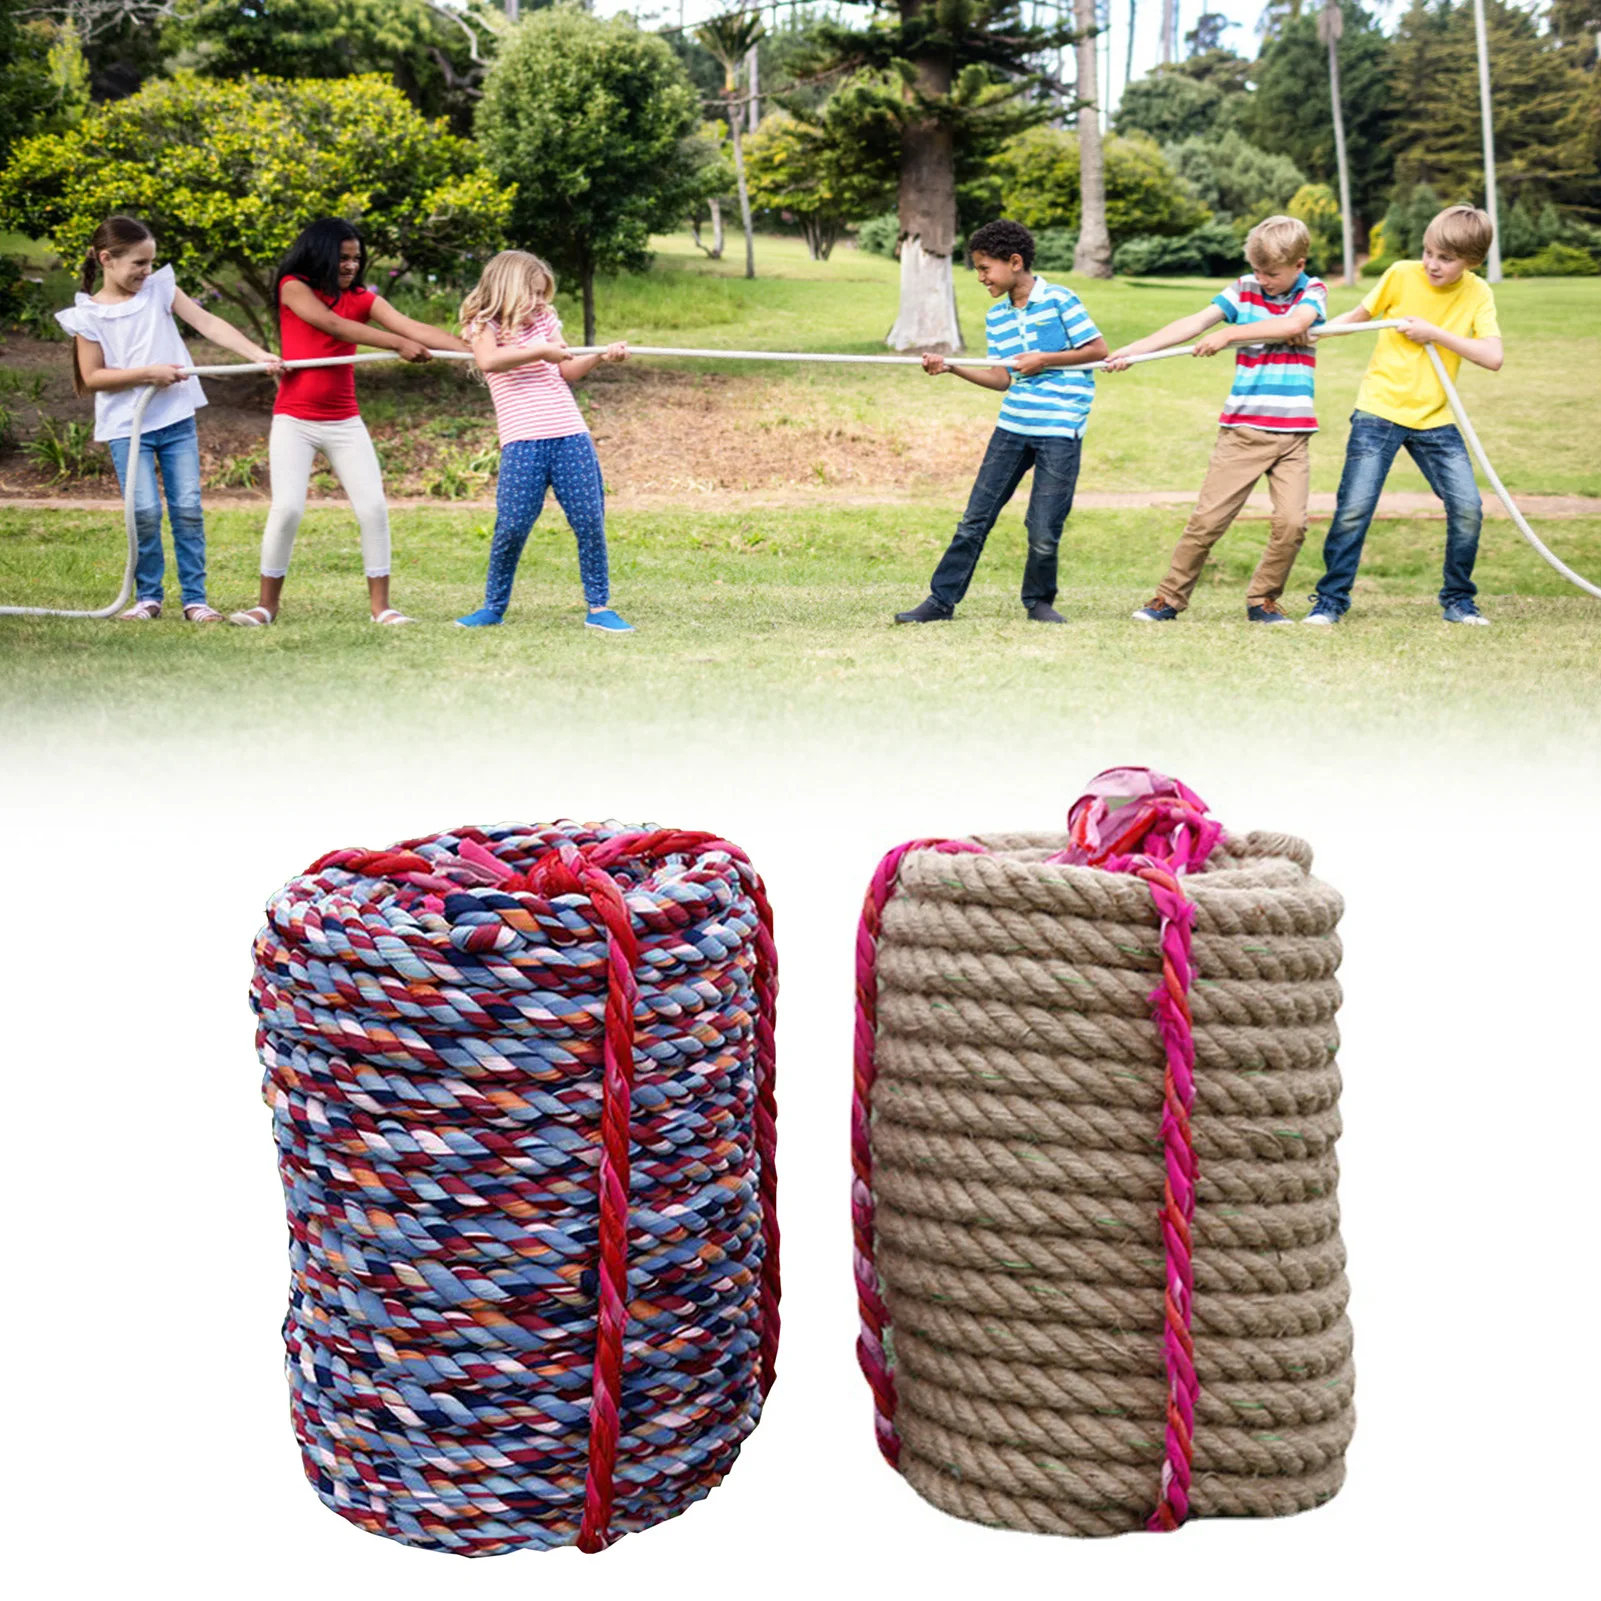 Twisted Jute Rope Multifunctional And Natural Colorful Thickened Jute Twine Rope Natural Heavy Duty Rope Cord For Crafts Cat Scr